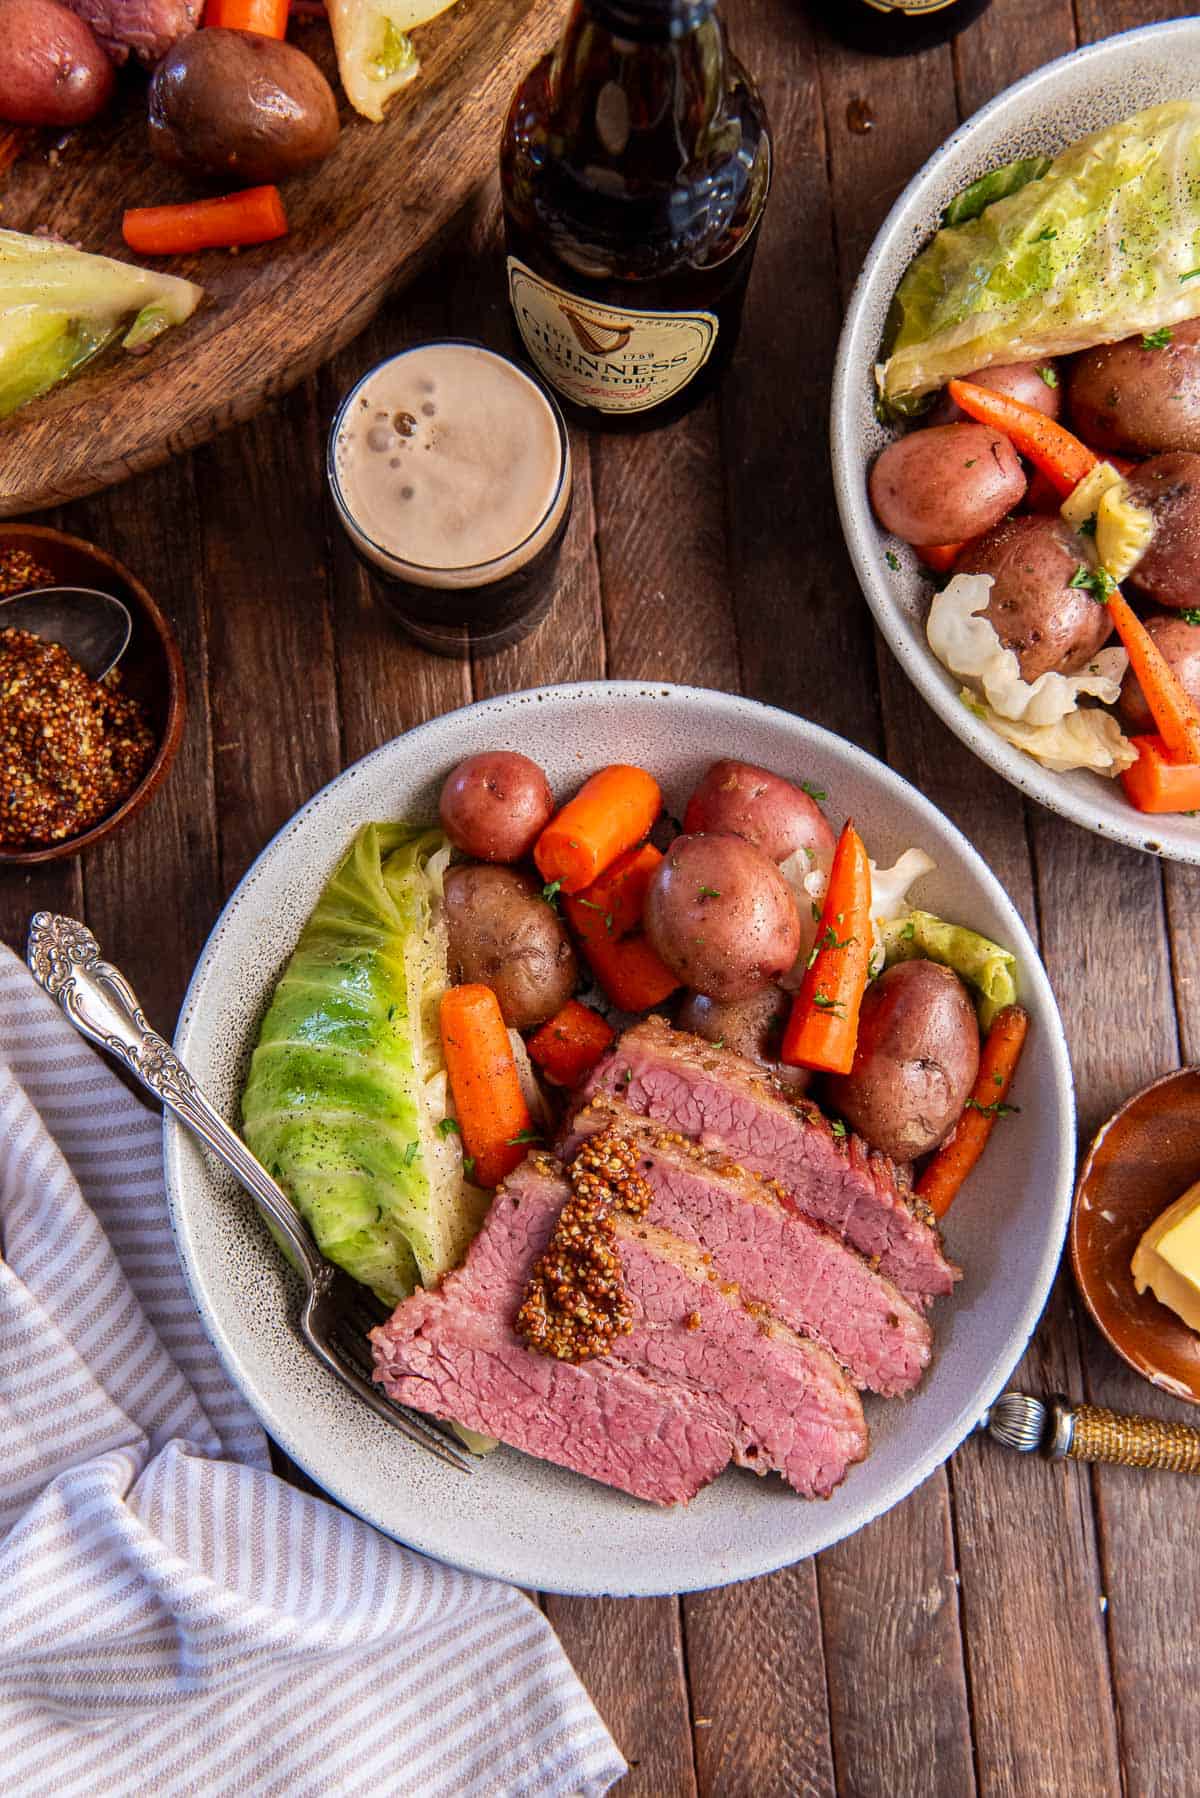 Two bowls of corned beef and cabbage with carrots and potatoes next to a glass filled with Guinness beer.